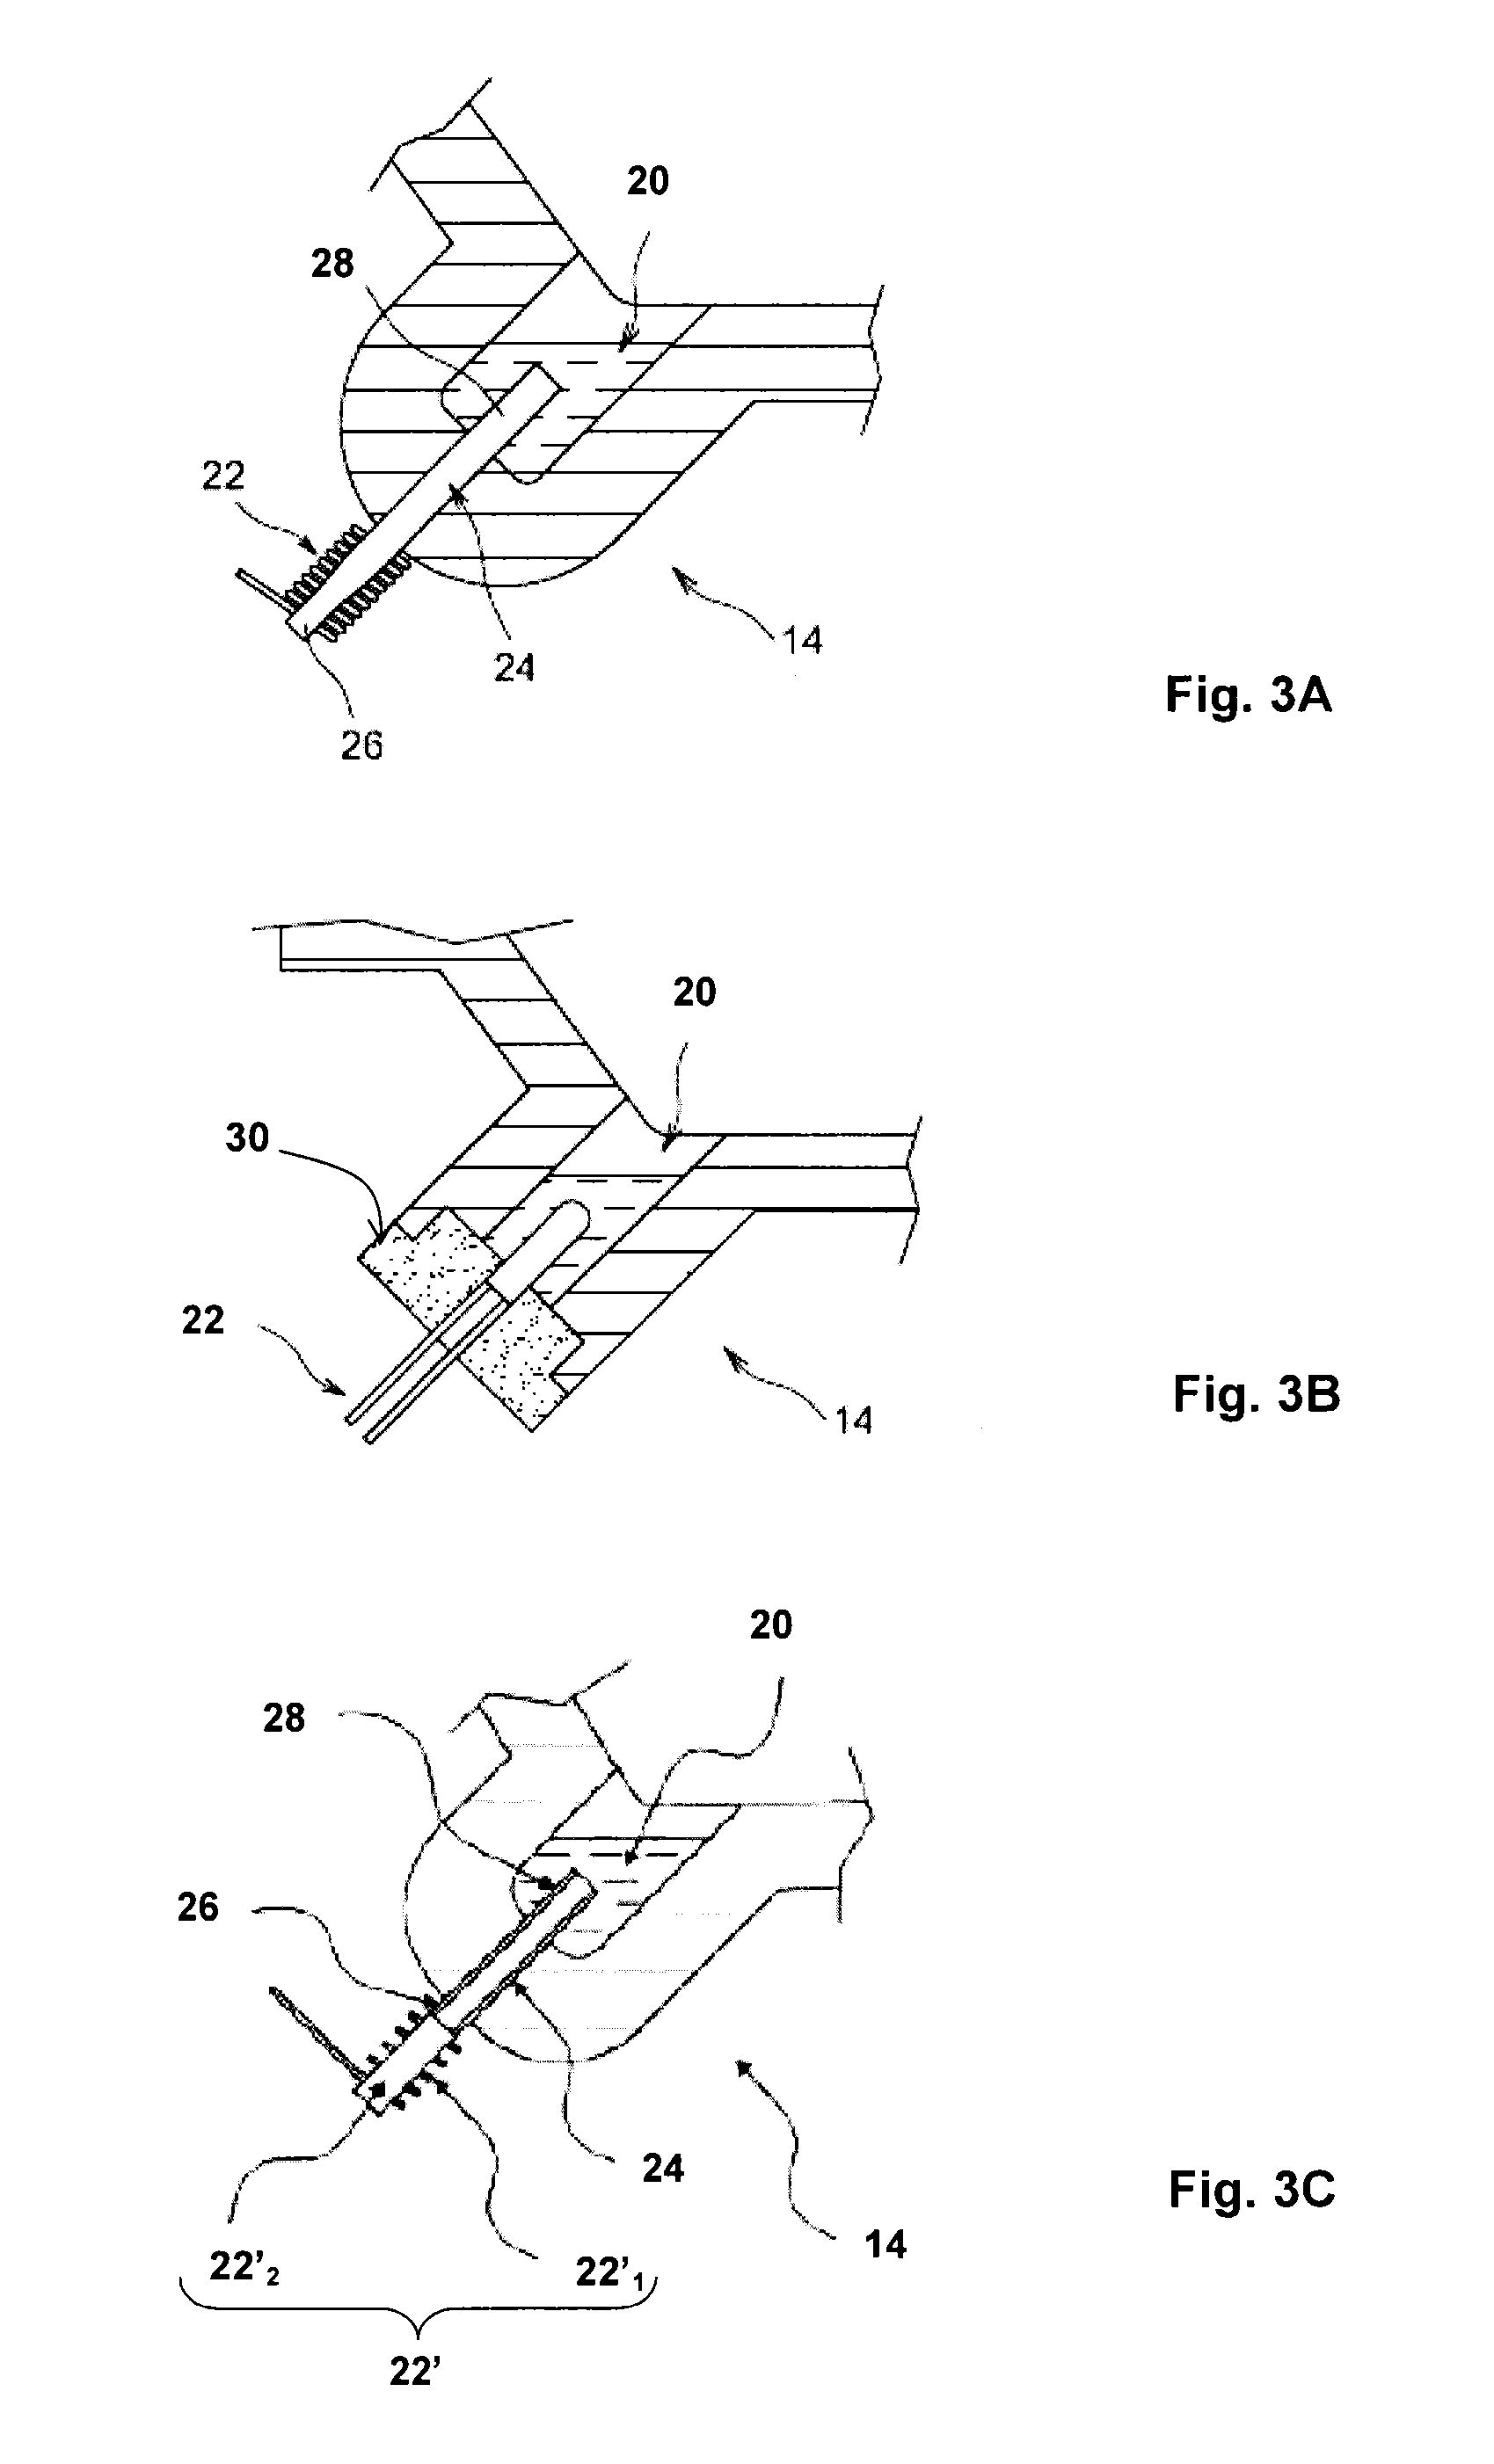 Electrical apparatus having a gas insulation containing a fluorinated compound